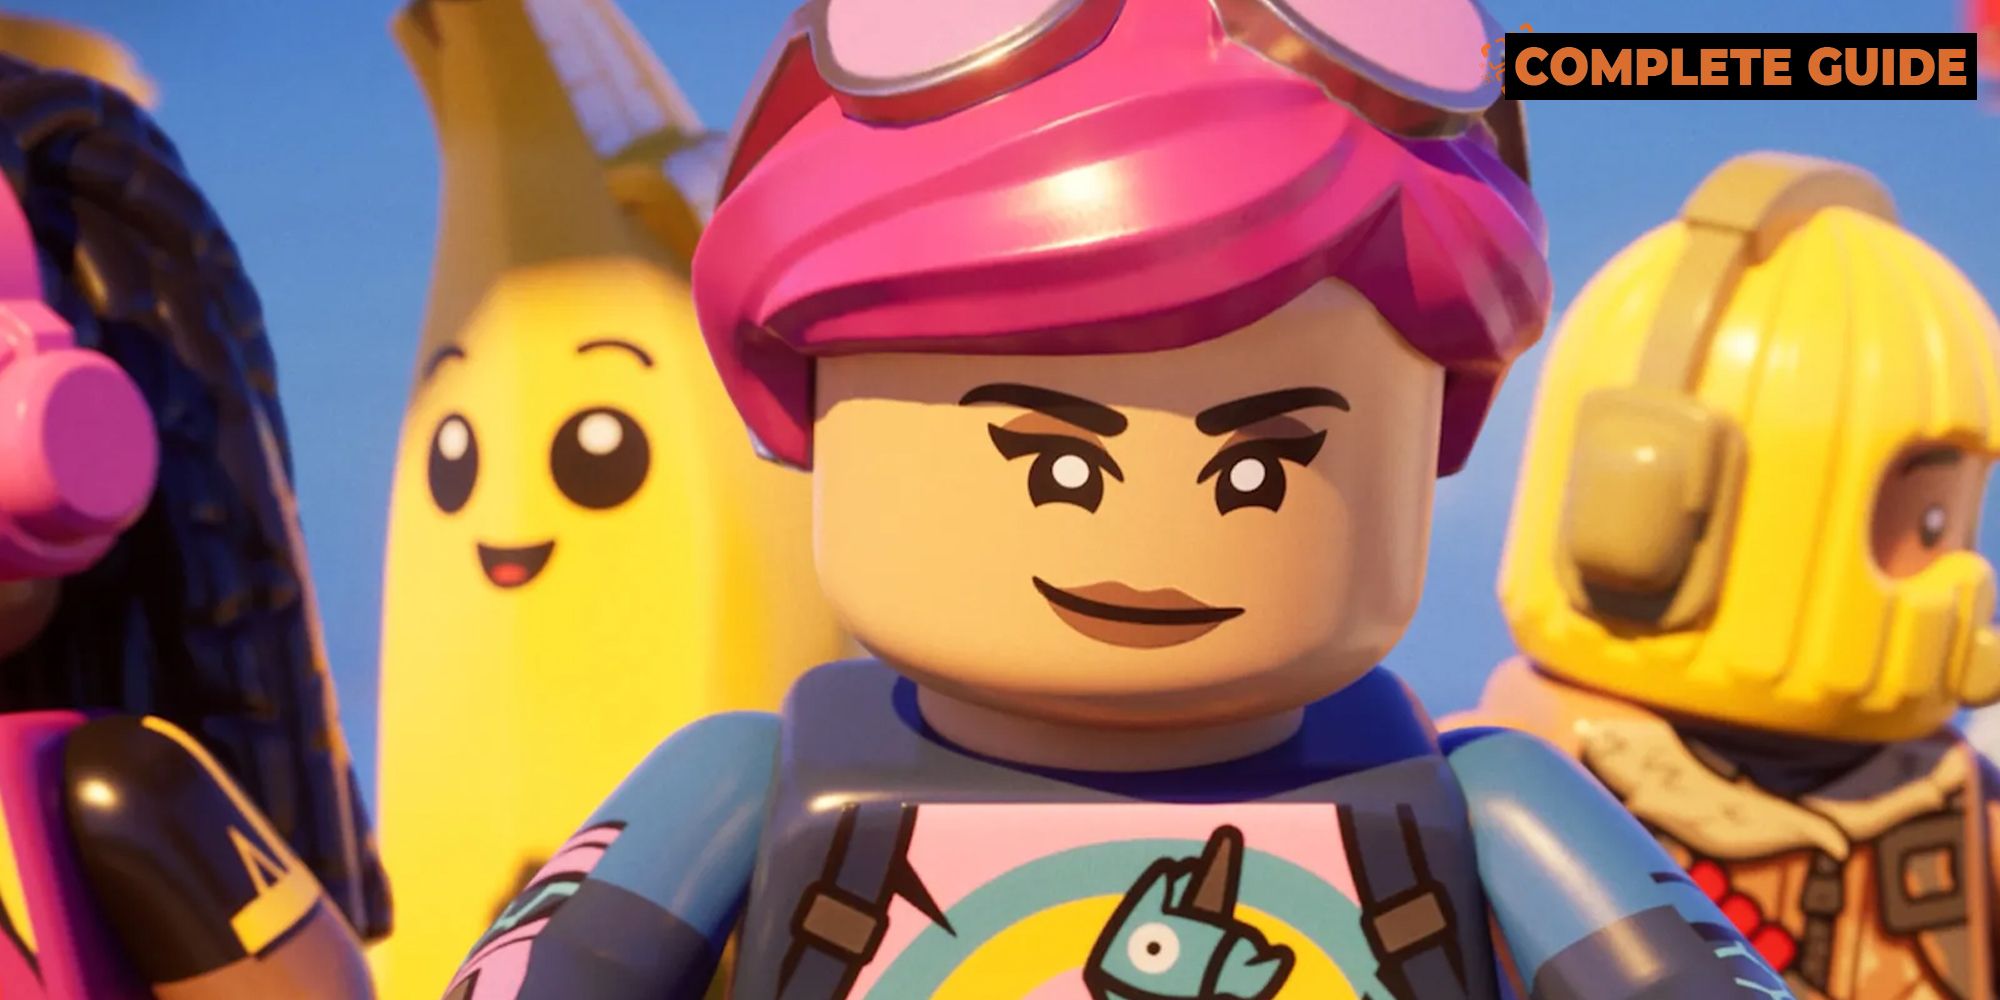 A group image of a few Fortnite characters in Lego Fortnite with the 'Complete Guide' overlay in the top right corner.